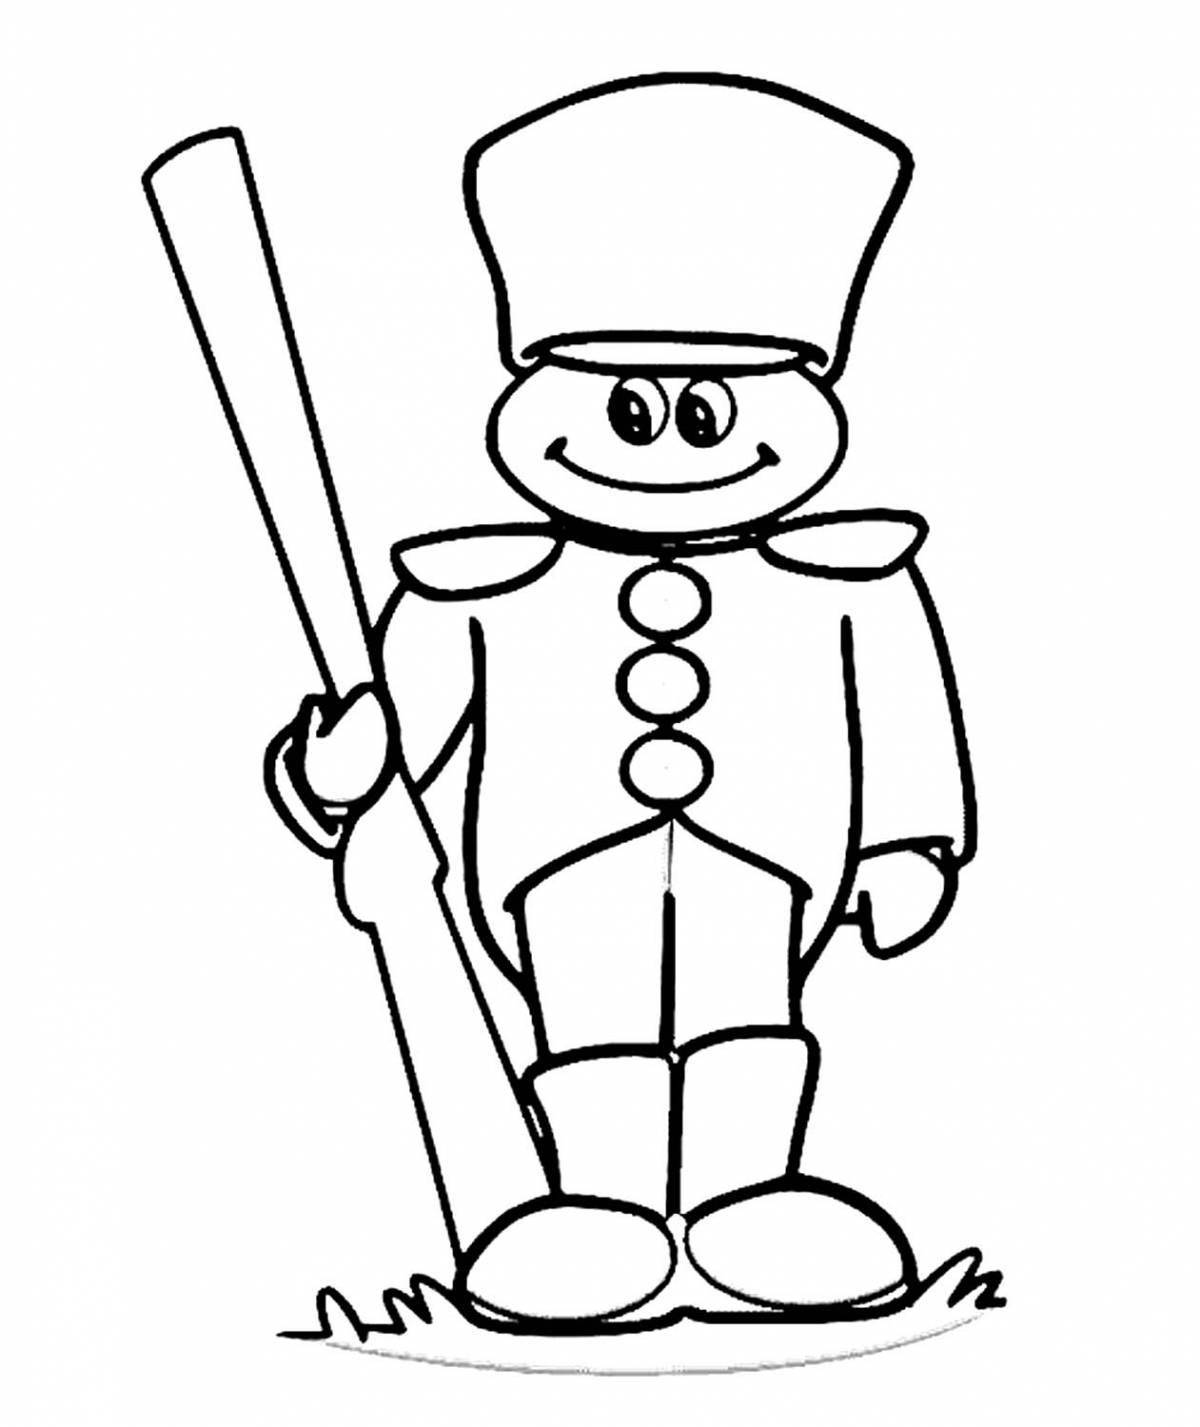 Amazing coloring pages of tin soldiers